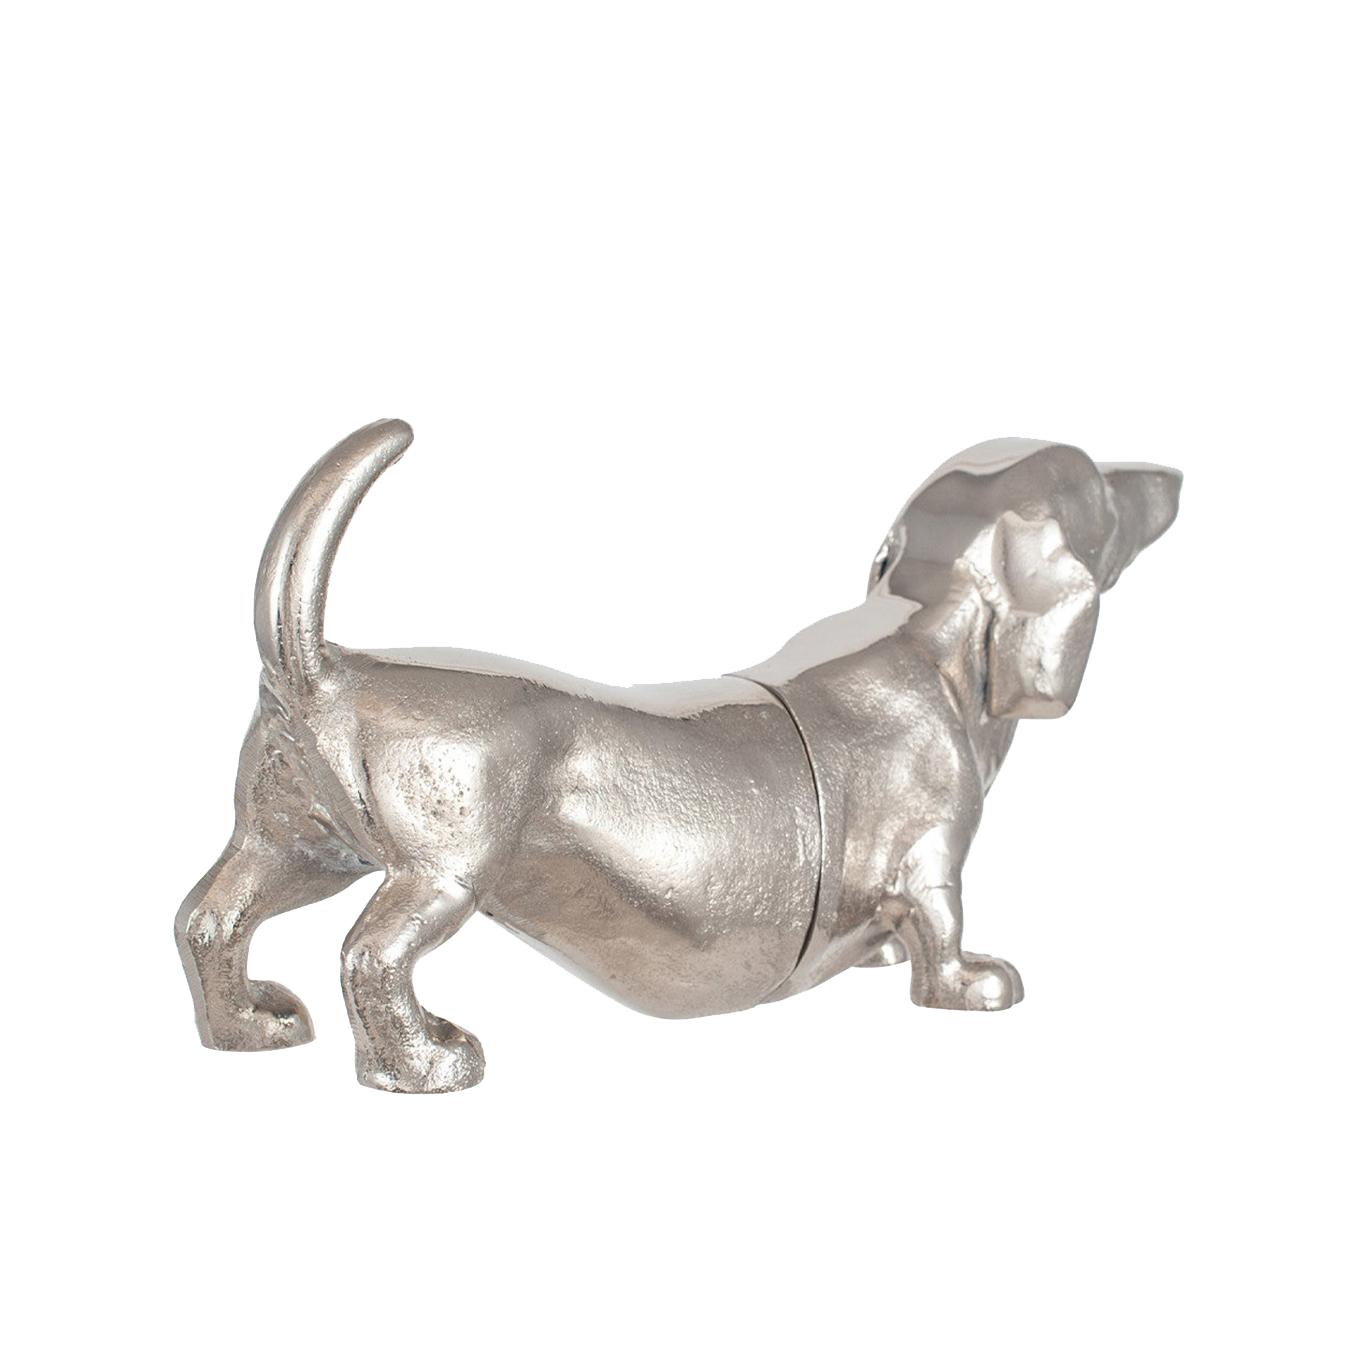 Silver Metal Sausage Dog Bookends